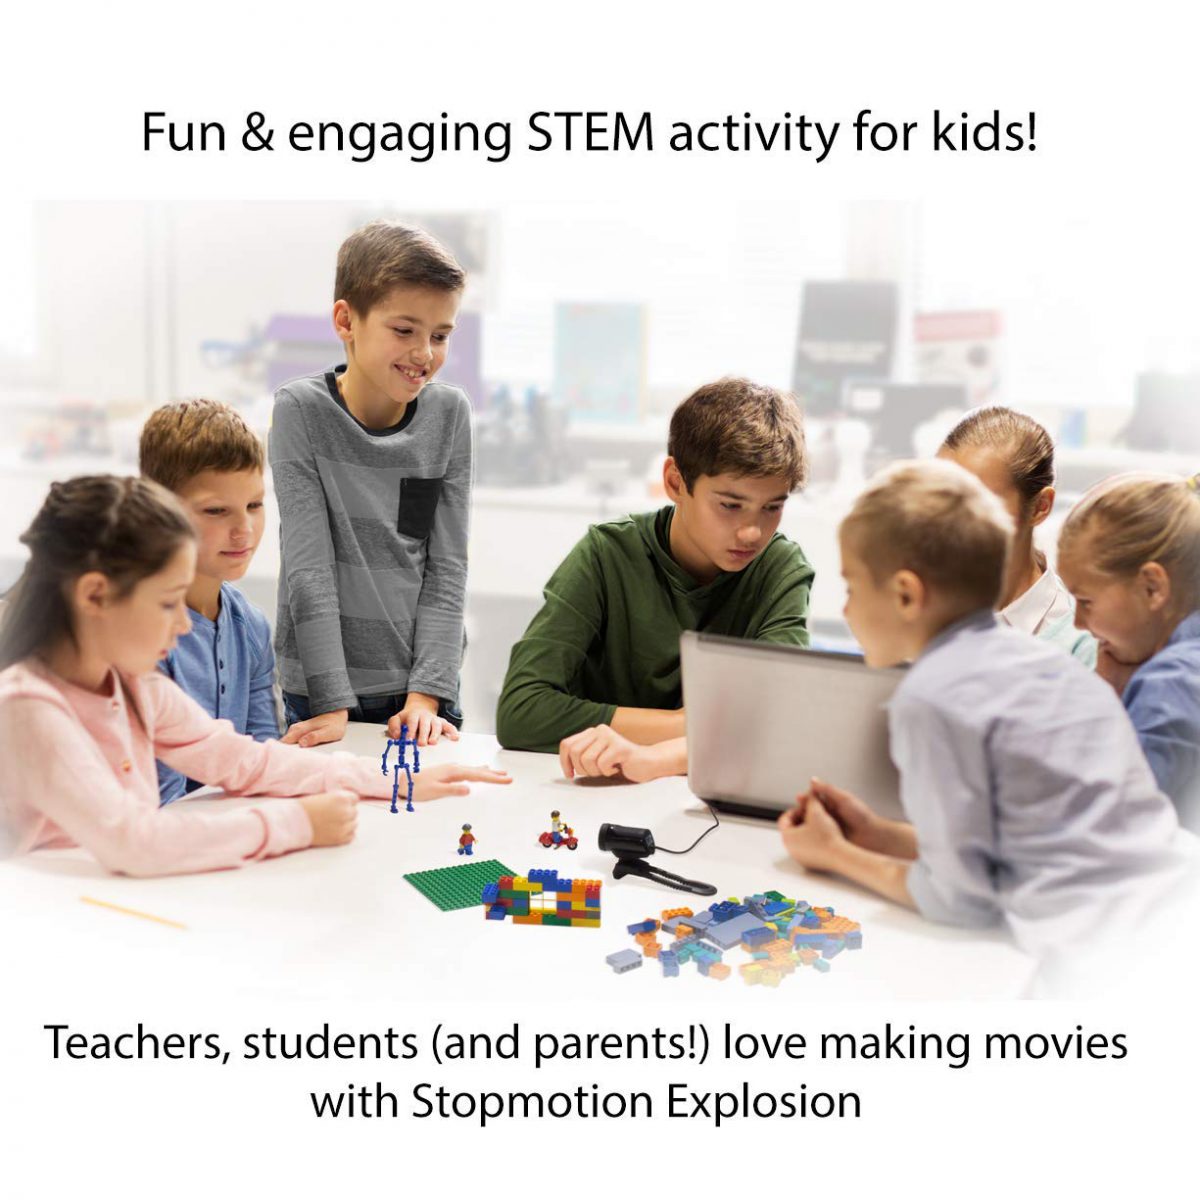 Stopmotion Explosion: Complete HD Stop Motion Animation Kit | Stop Motion Animation Software with Full HD 1080P Camera, Animation Software & Book (Windows & OS X) - $69.95